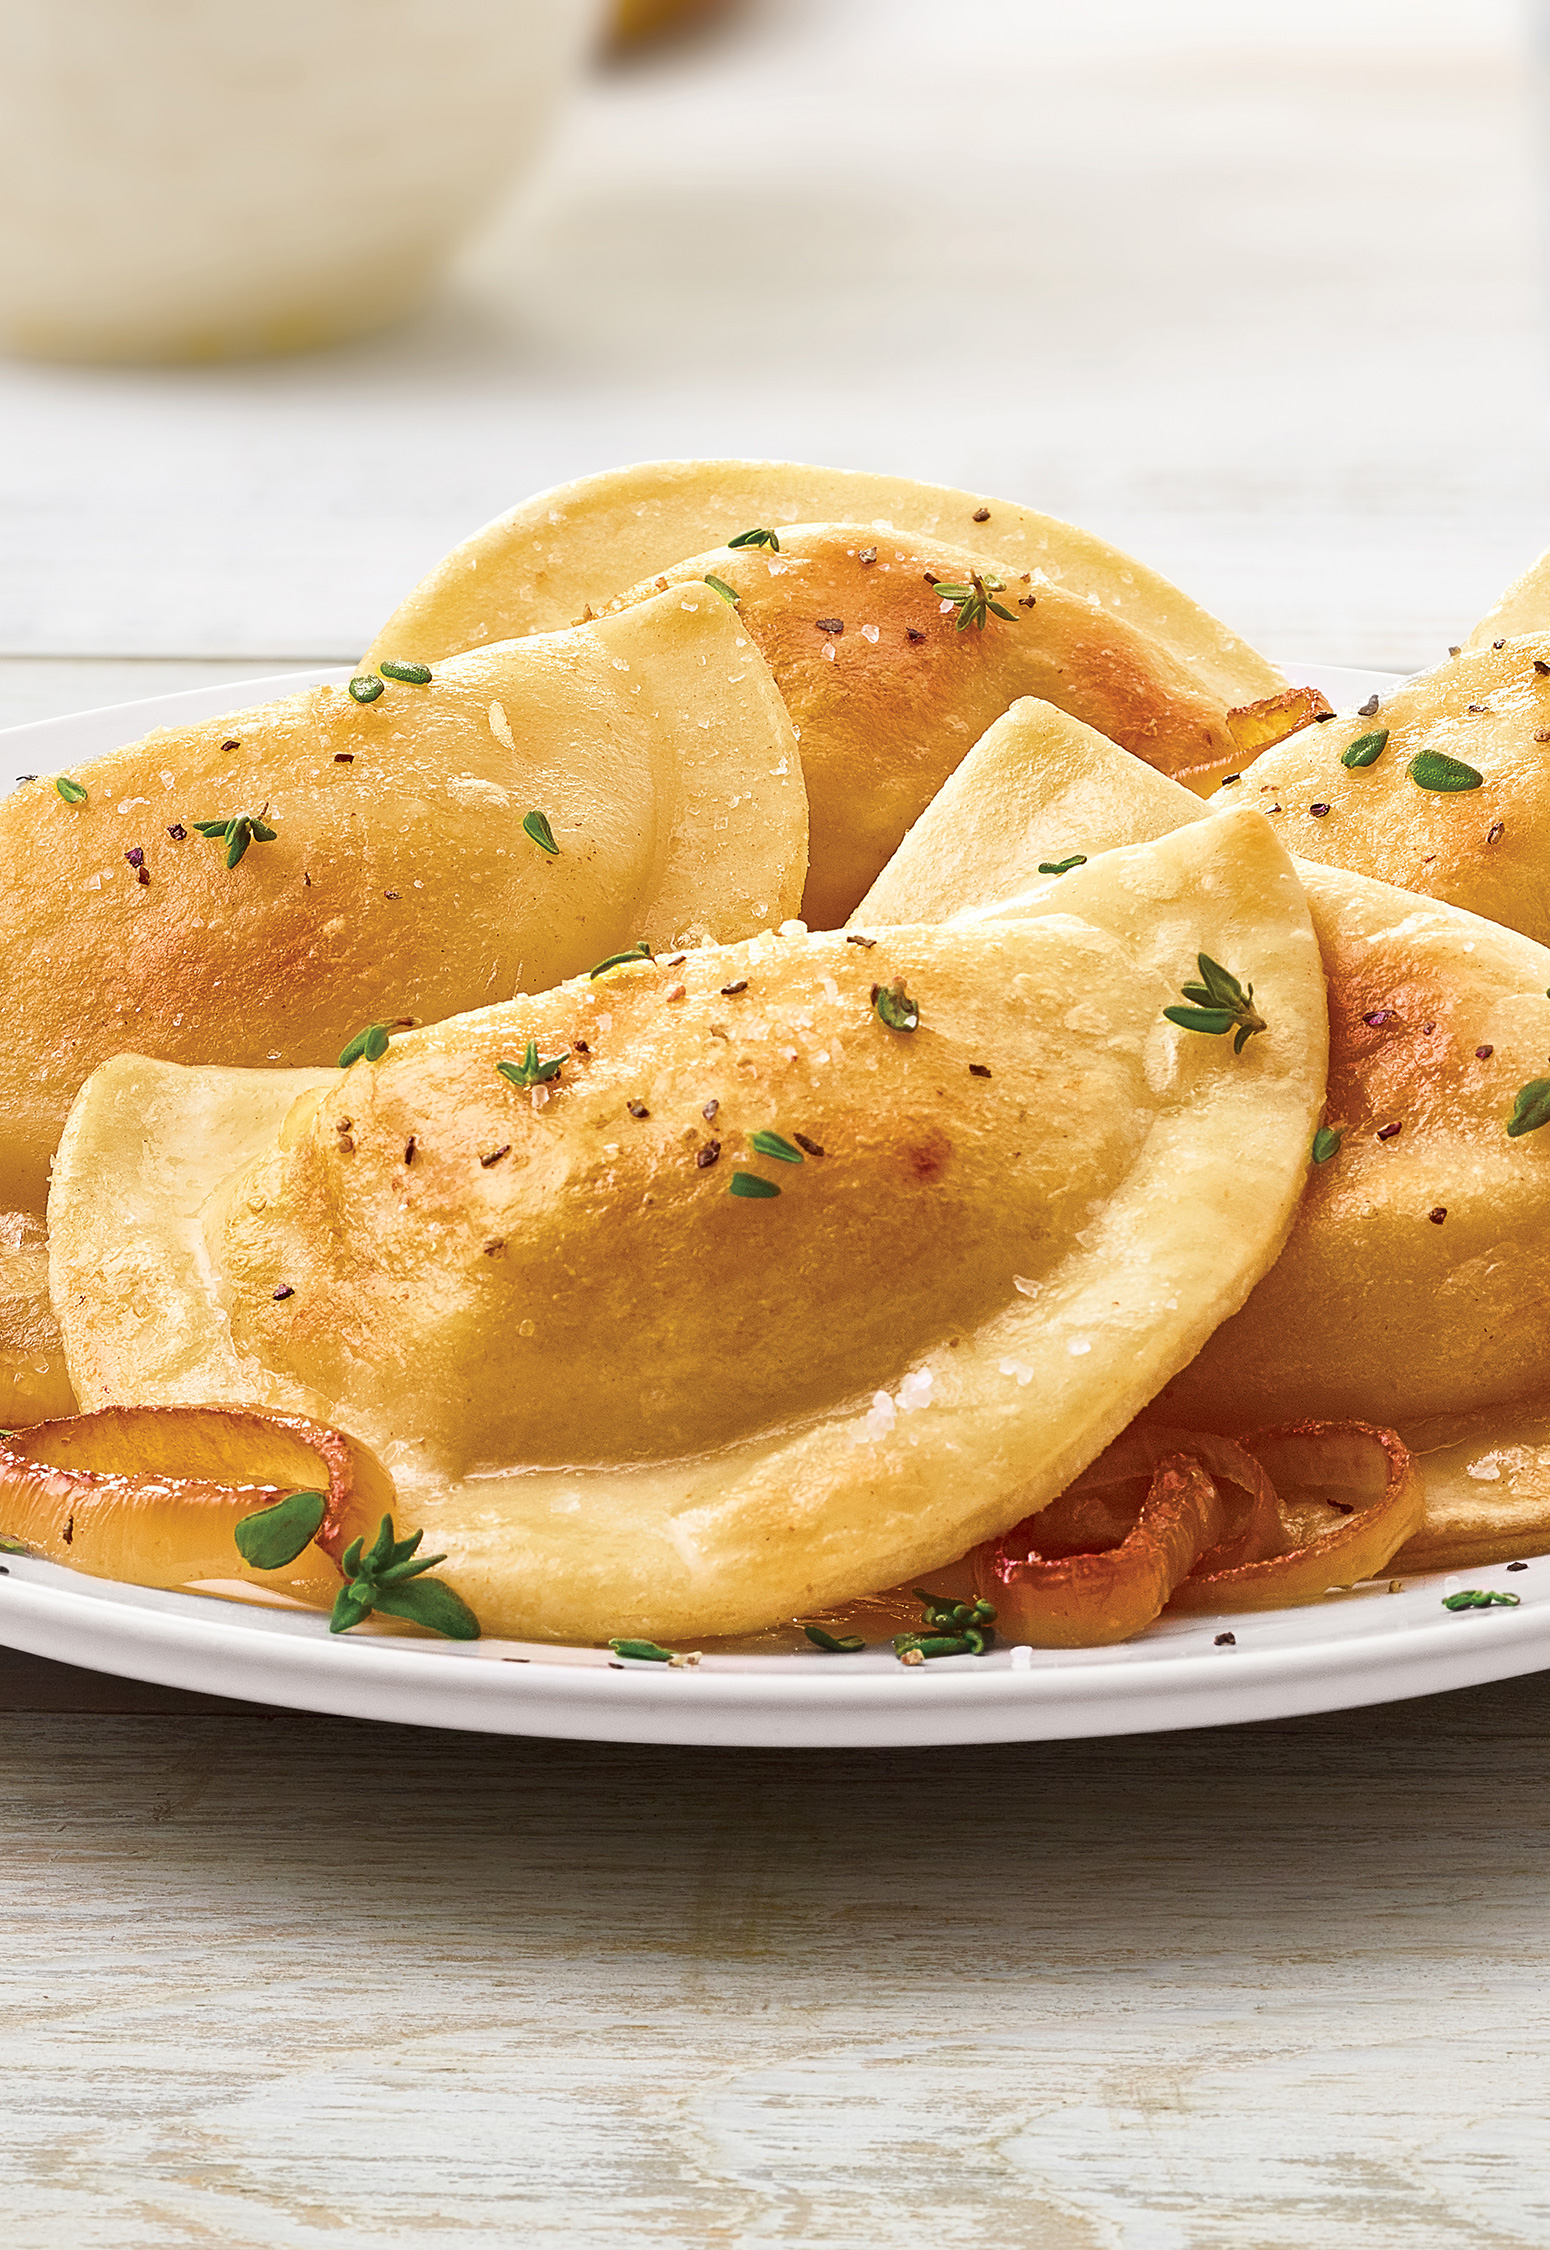 Counting Down The Top 10 Pierogy Squad Recipes